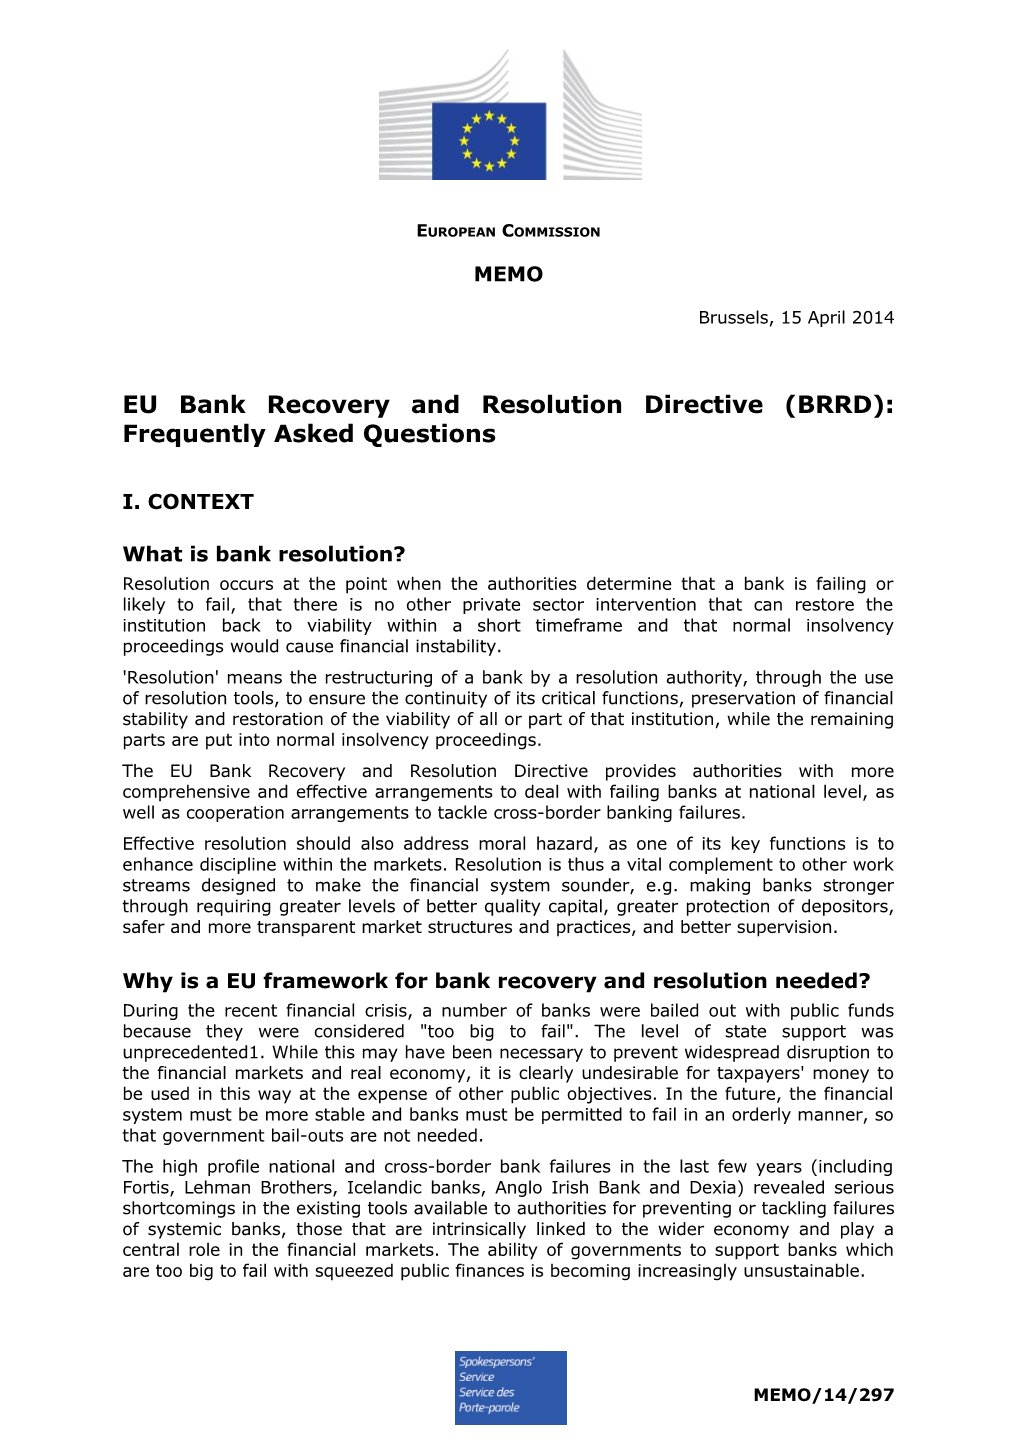 EU Bank Recovery and Resolution Directive (BRRD): Frequently Asked Questions